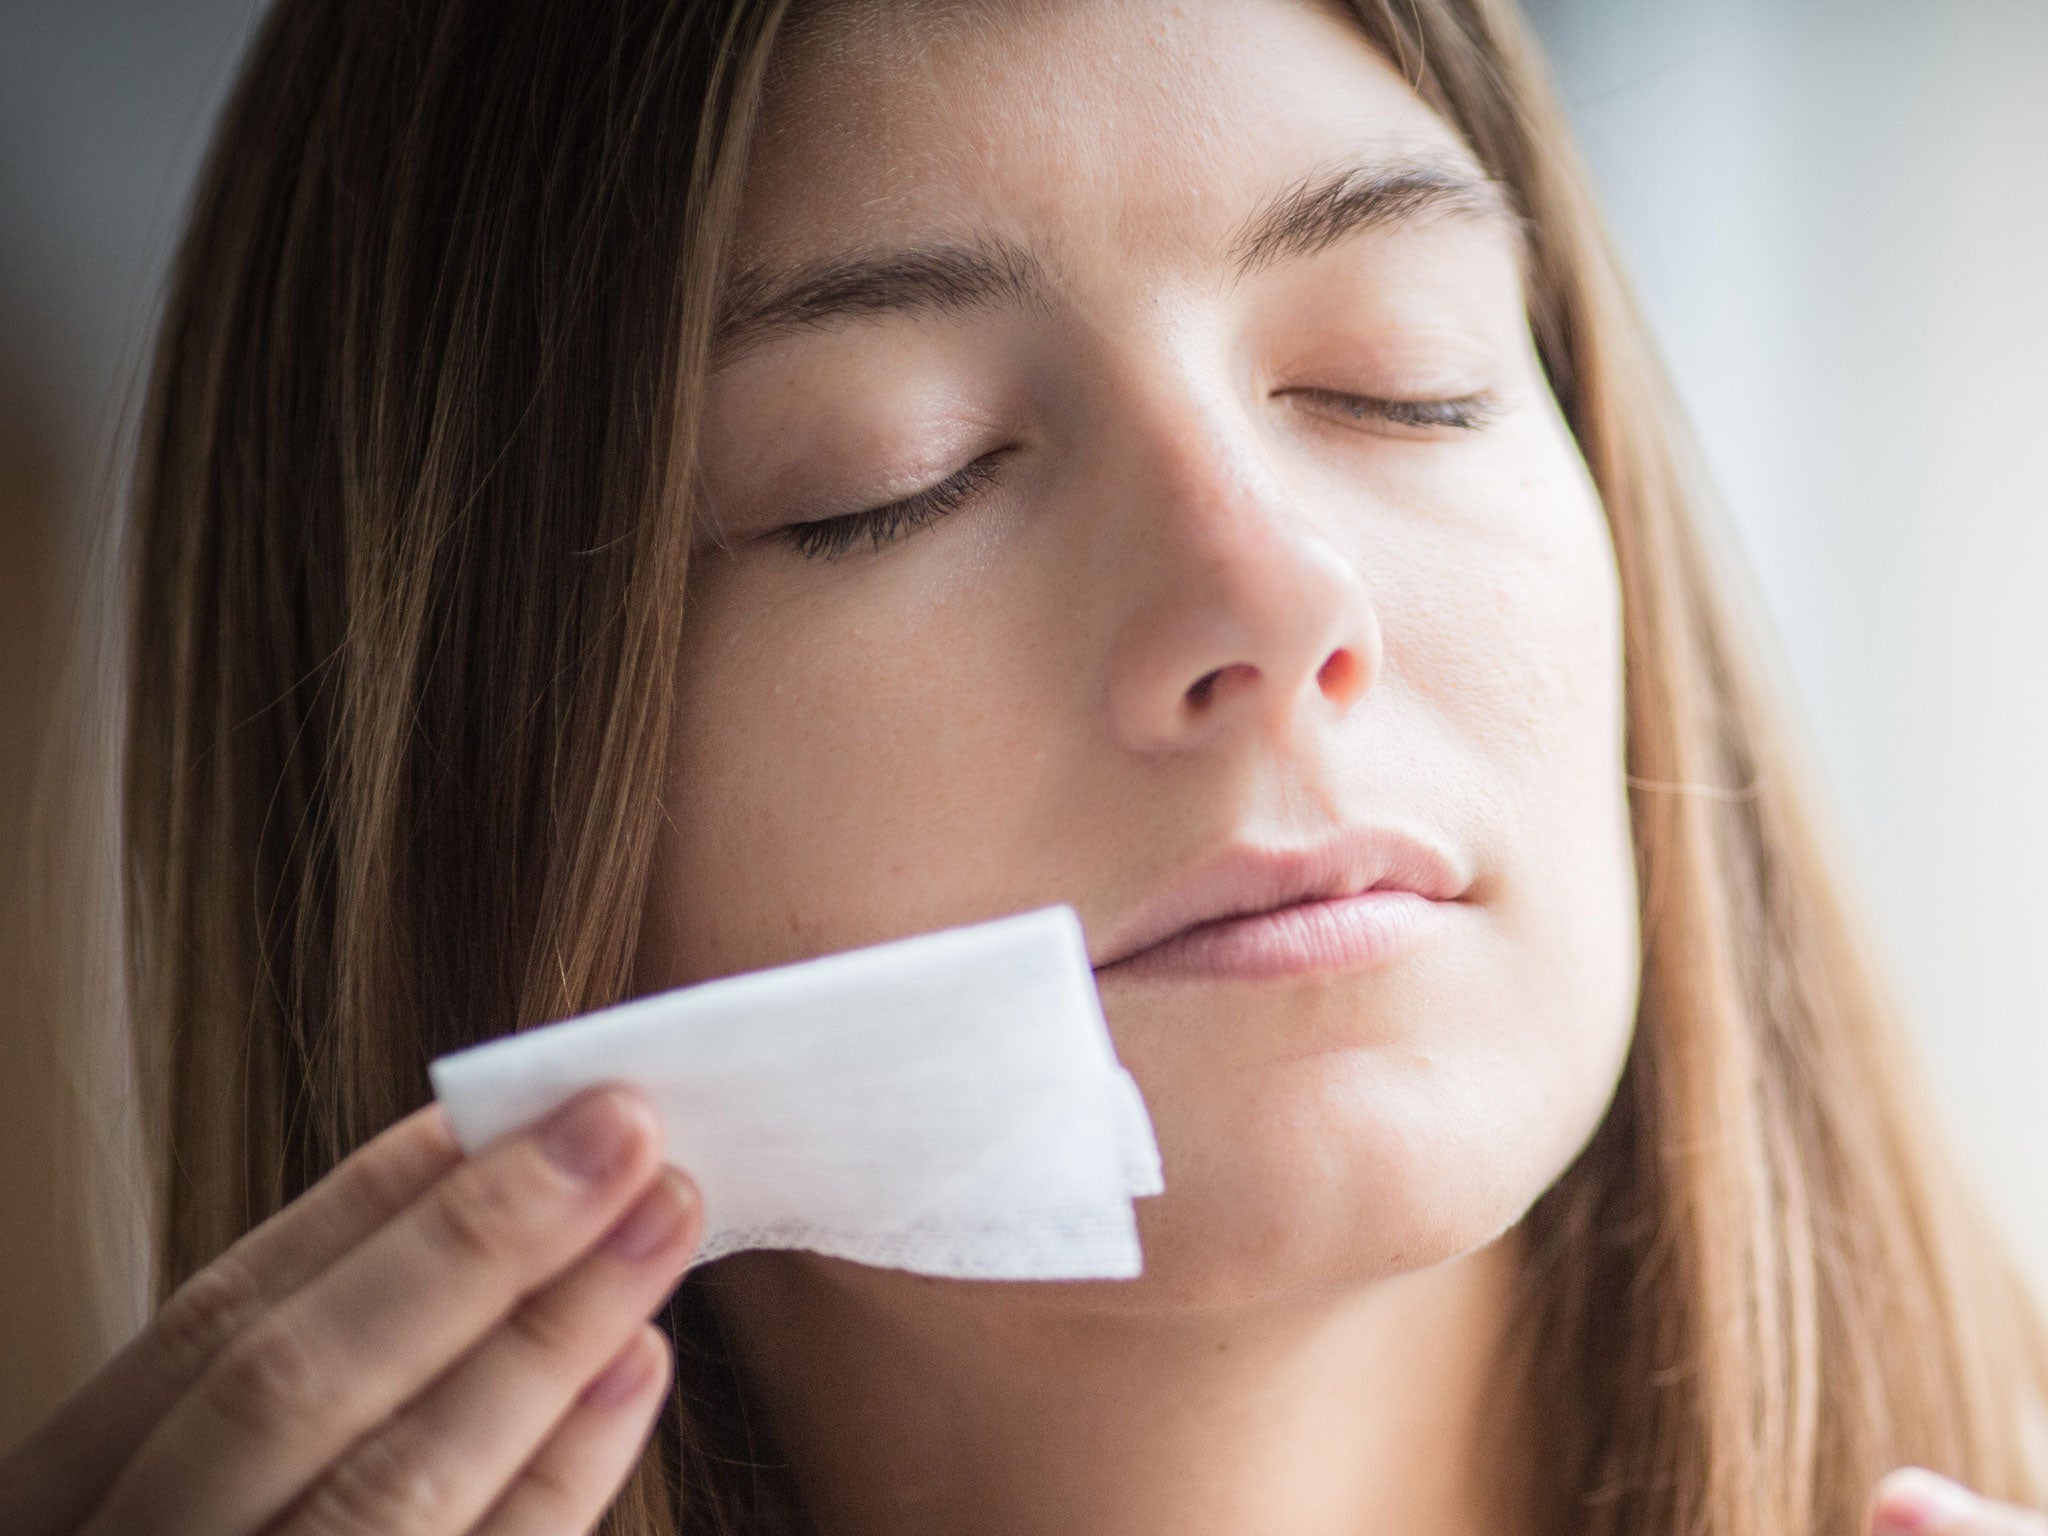 Volunteers were asked to smell other people's odours on gauze pads and rate their appeal on a scale of one to five